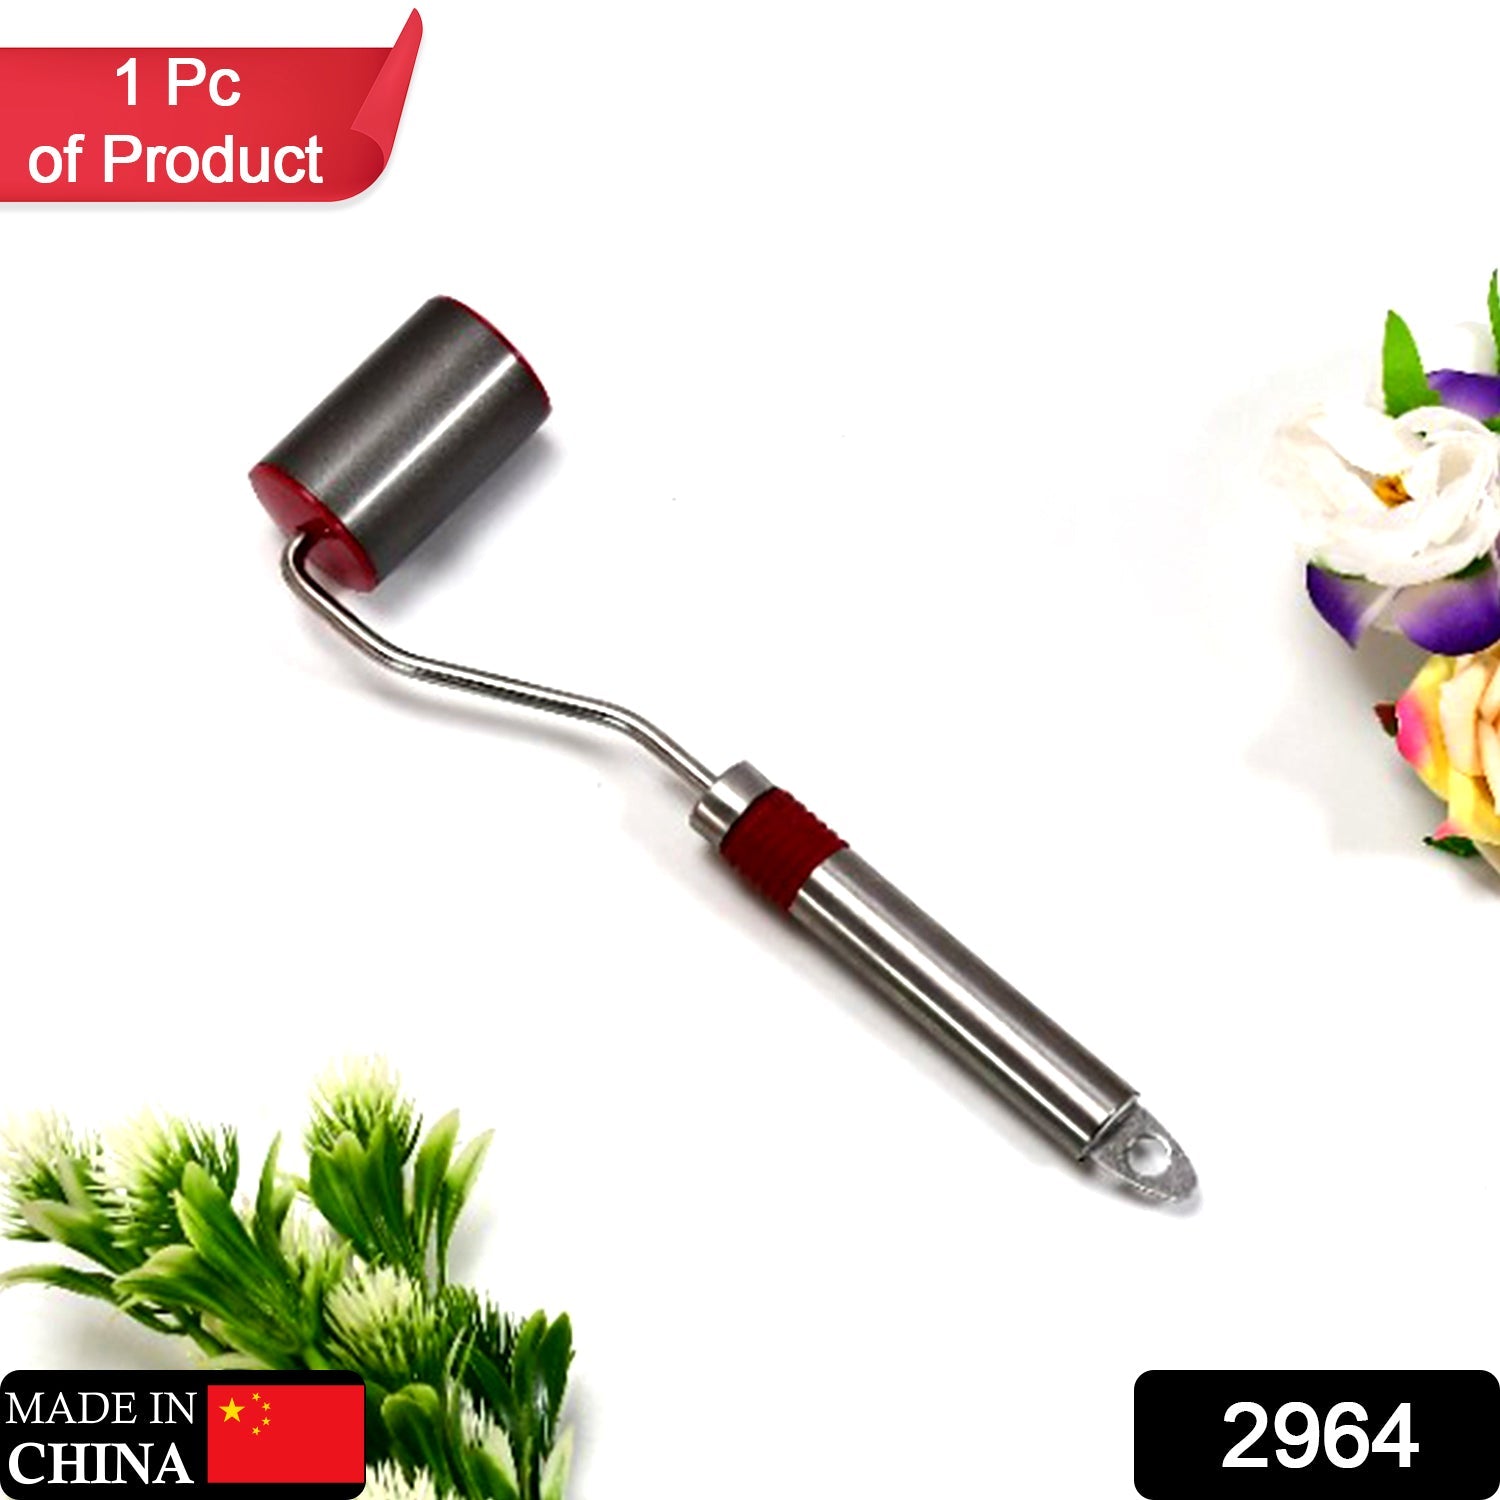 2964 Stainless Steel Dough Roller Baking Cooking Tool Roller for Pasta Cookies Pizza and Dough DeoDap